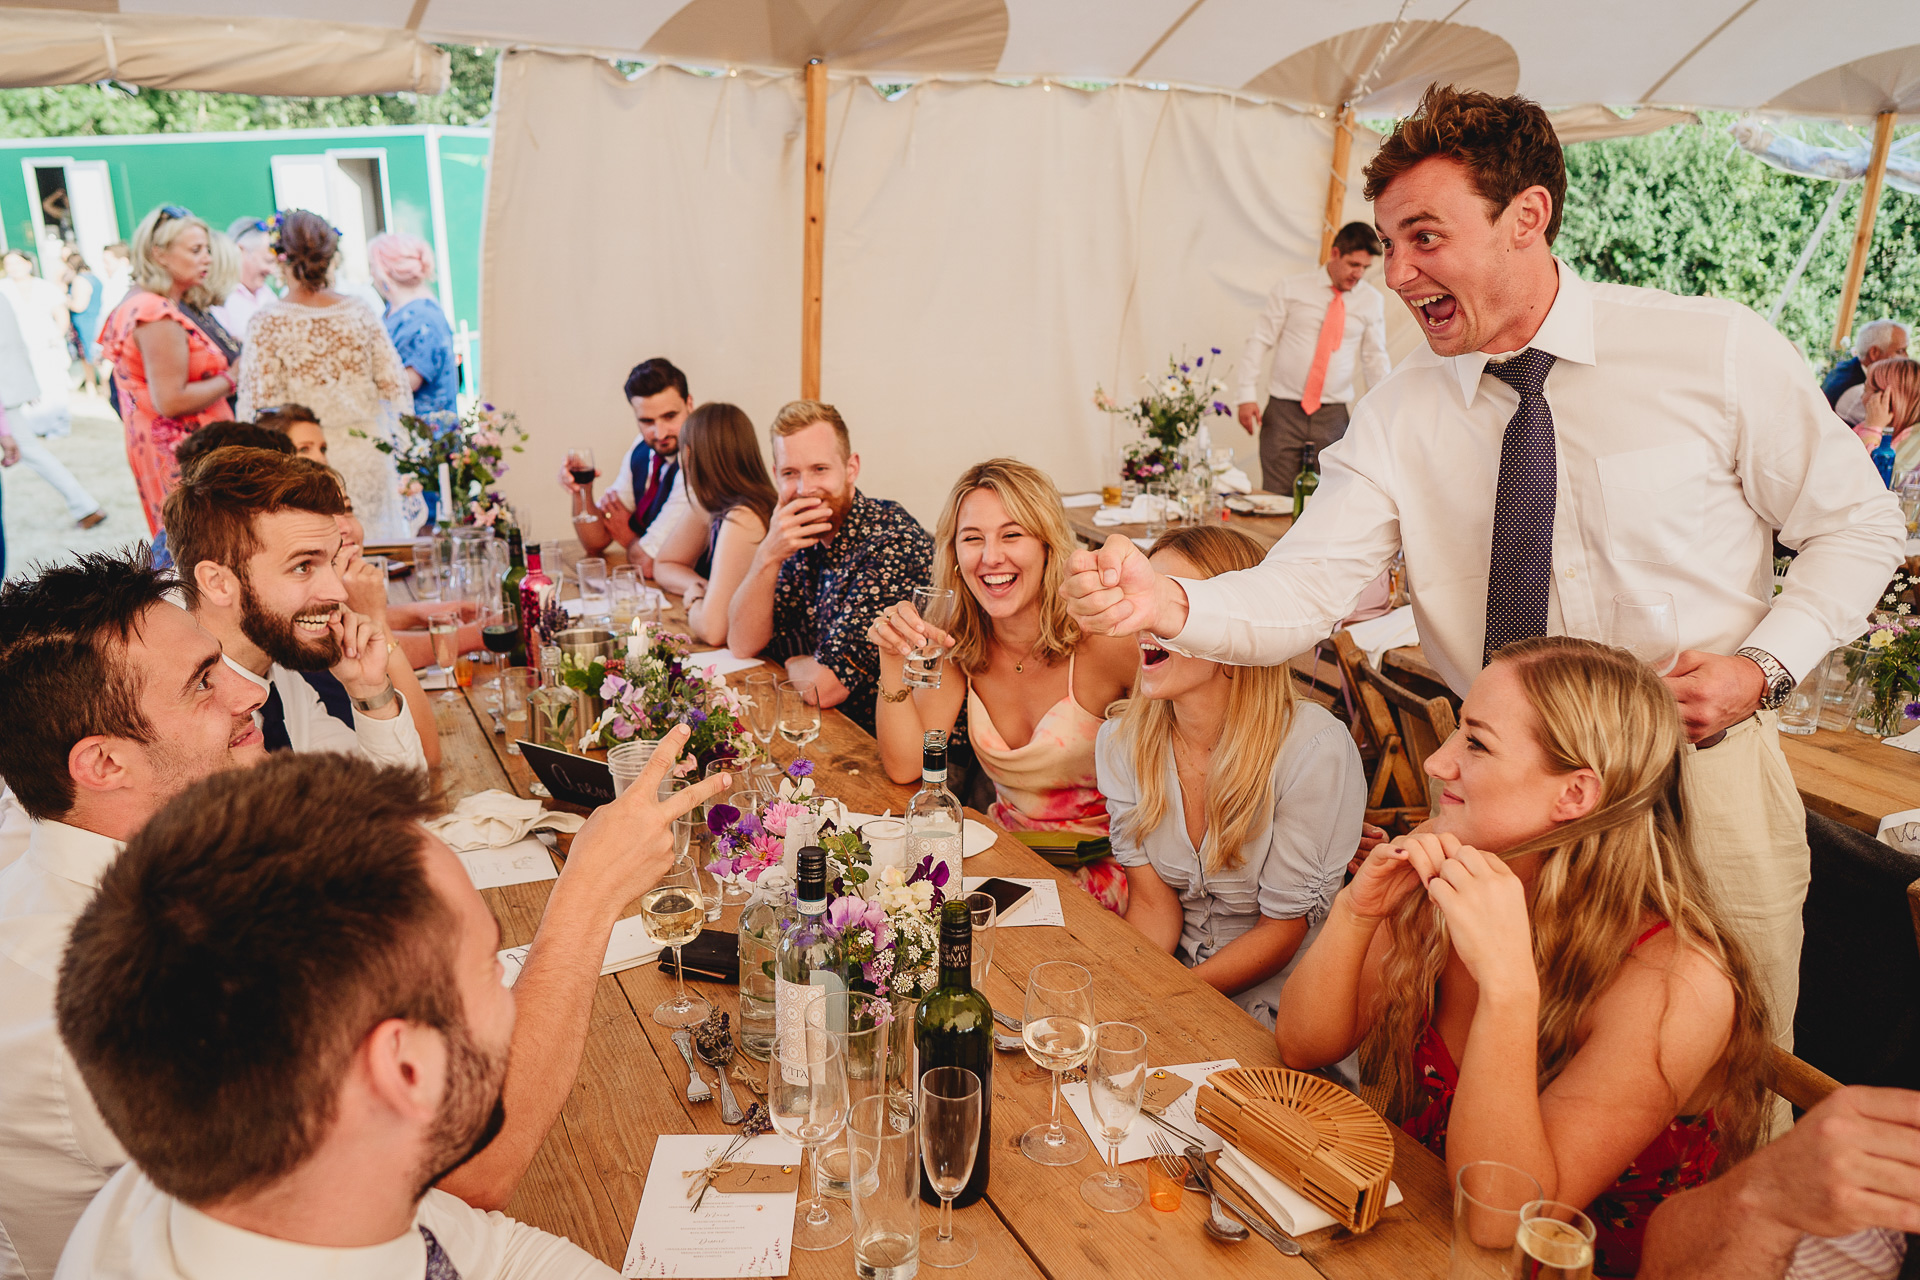 Wedding guests laughing together around a table in a marquee